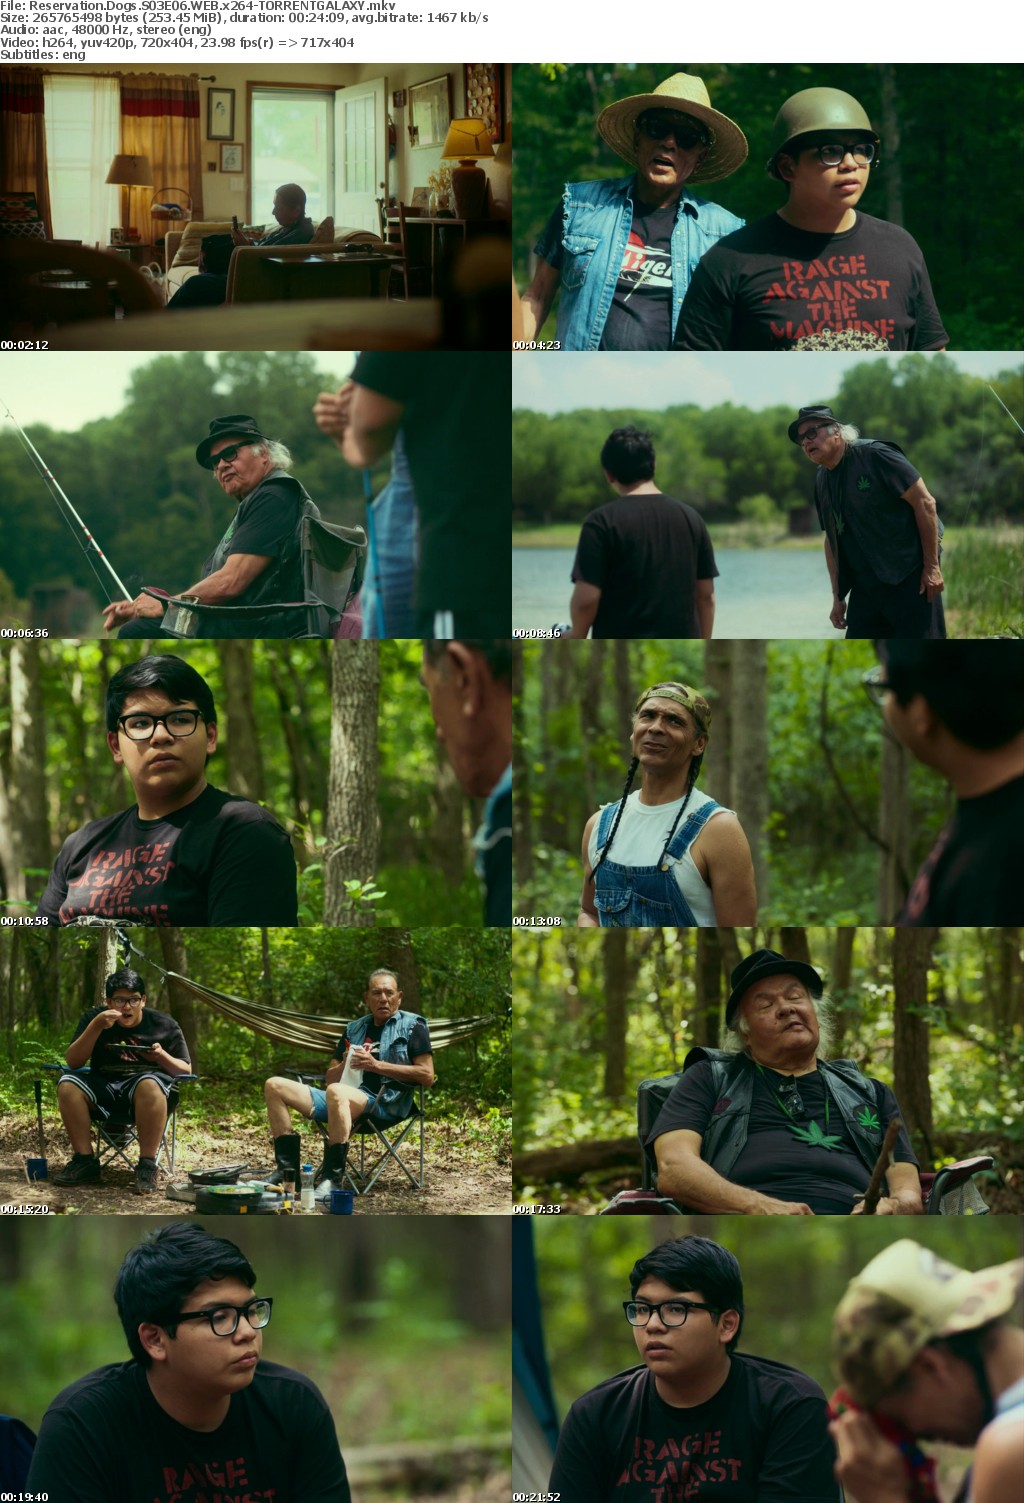 Reservation Dogs S03E06 WEB x264-GALAXY